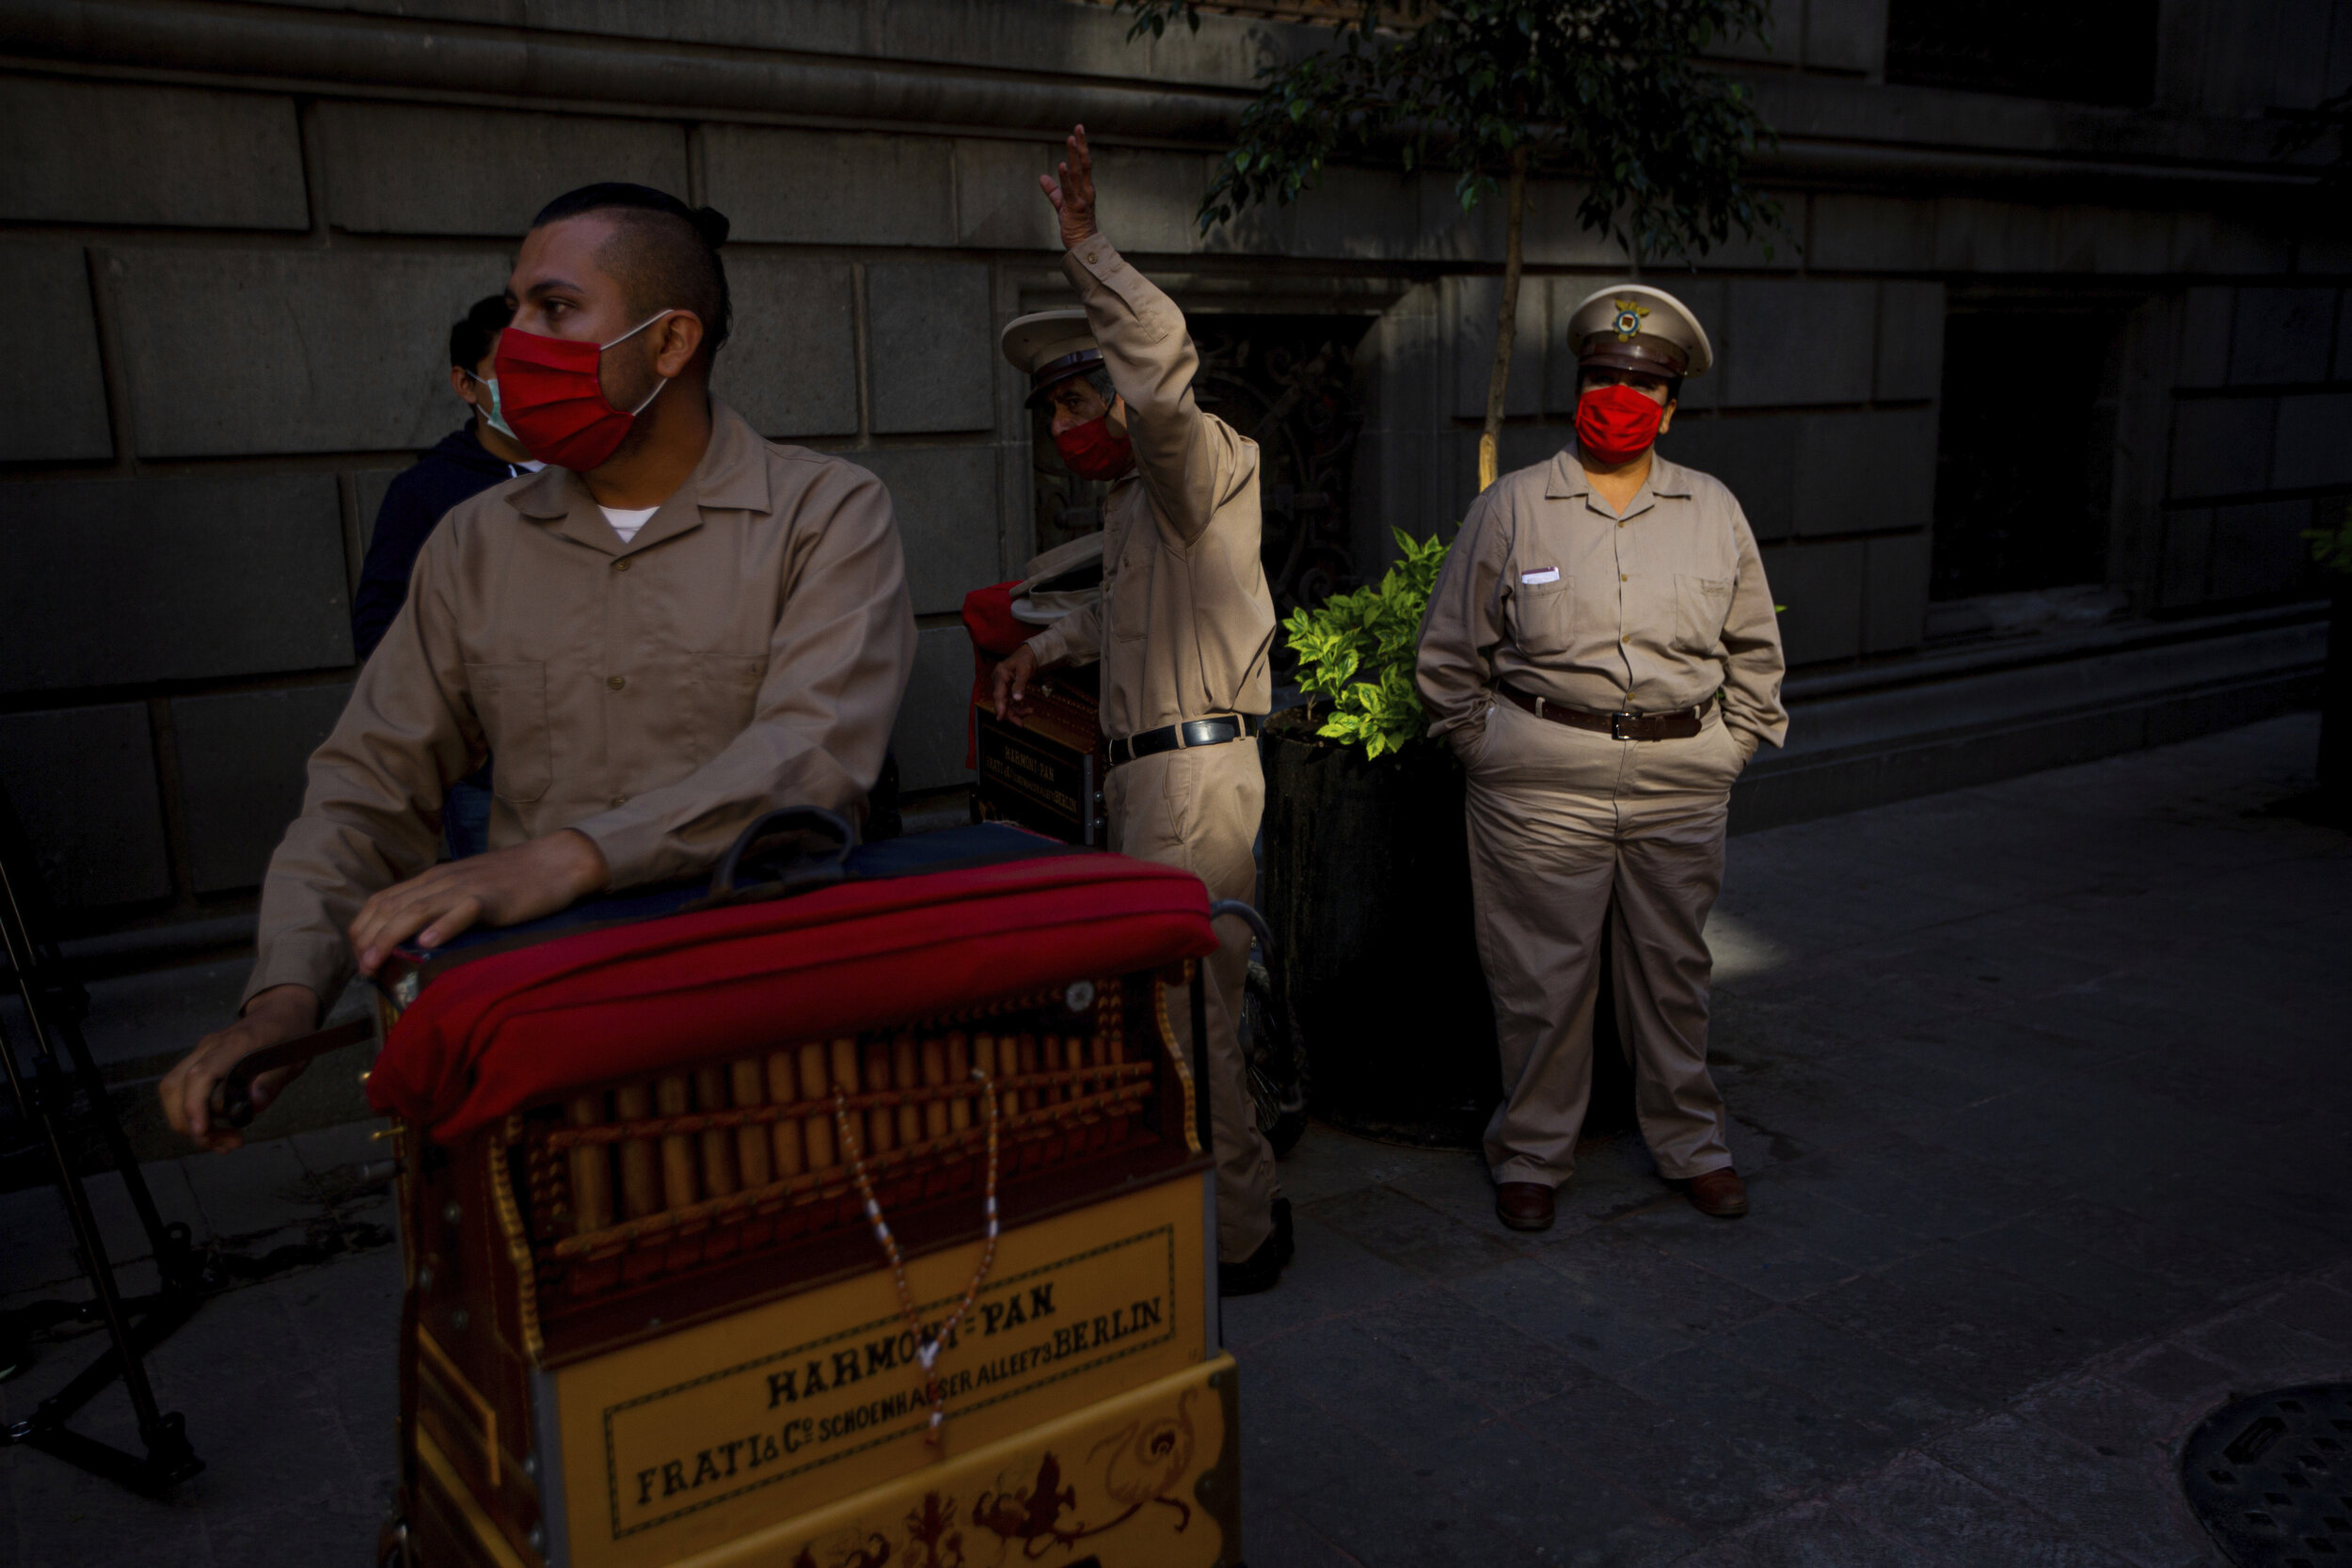  Organ grinders who have lost their ability to earn tips in the street due to restrictions to curb the new coronavirus wait for donated groceries in Mexico City, Thursday, June 4, 2020. (AP Photo/Fernando Llano) 